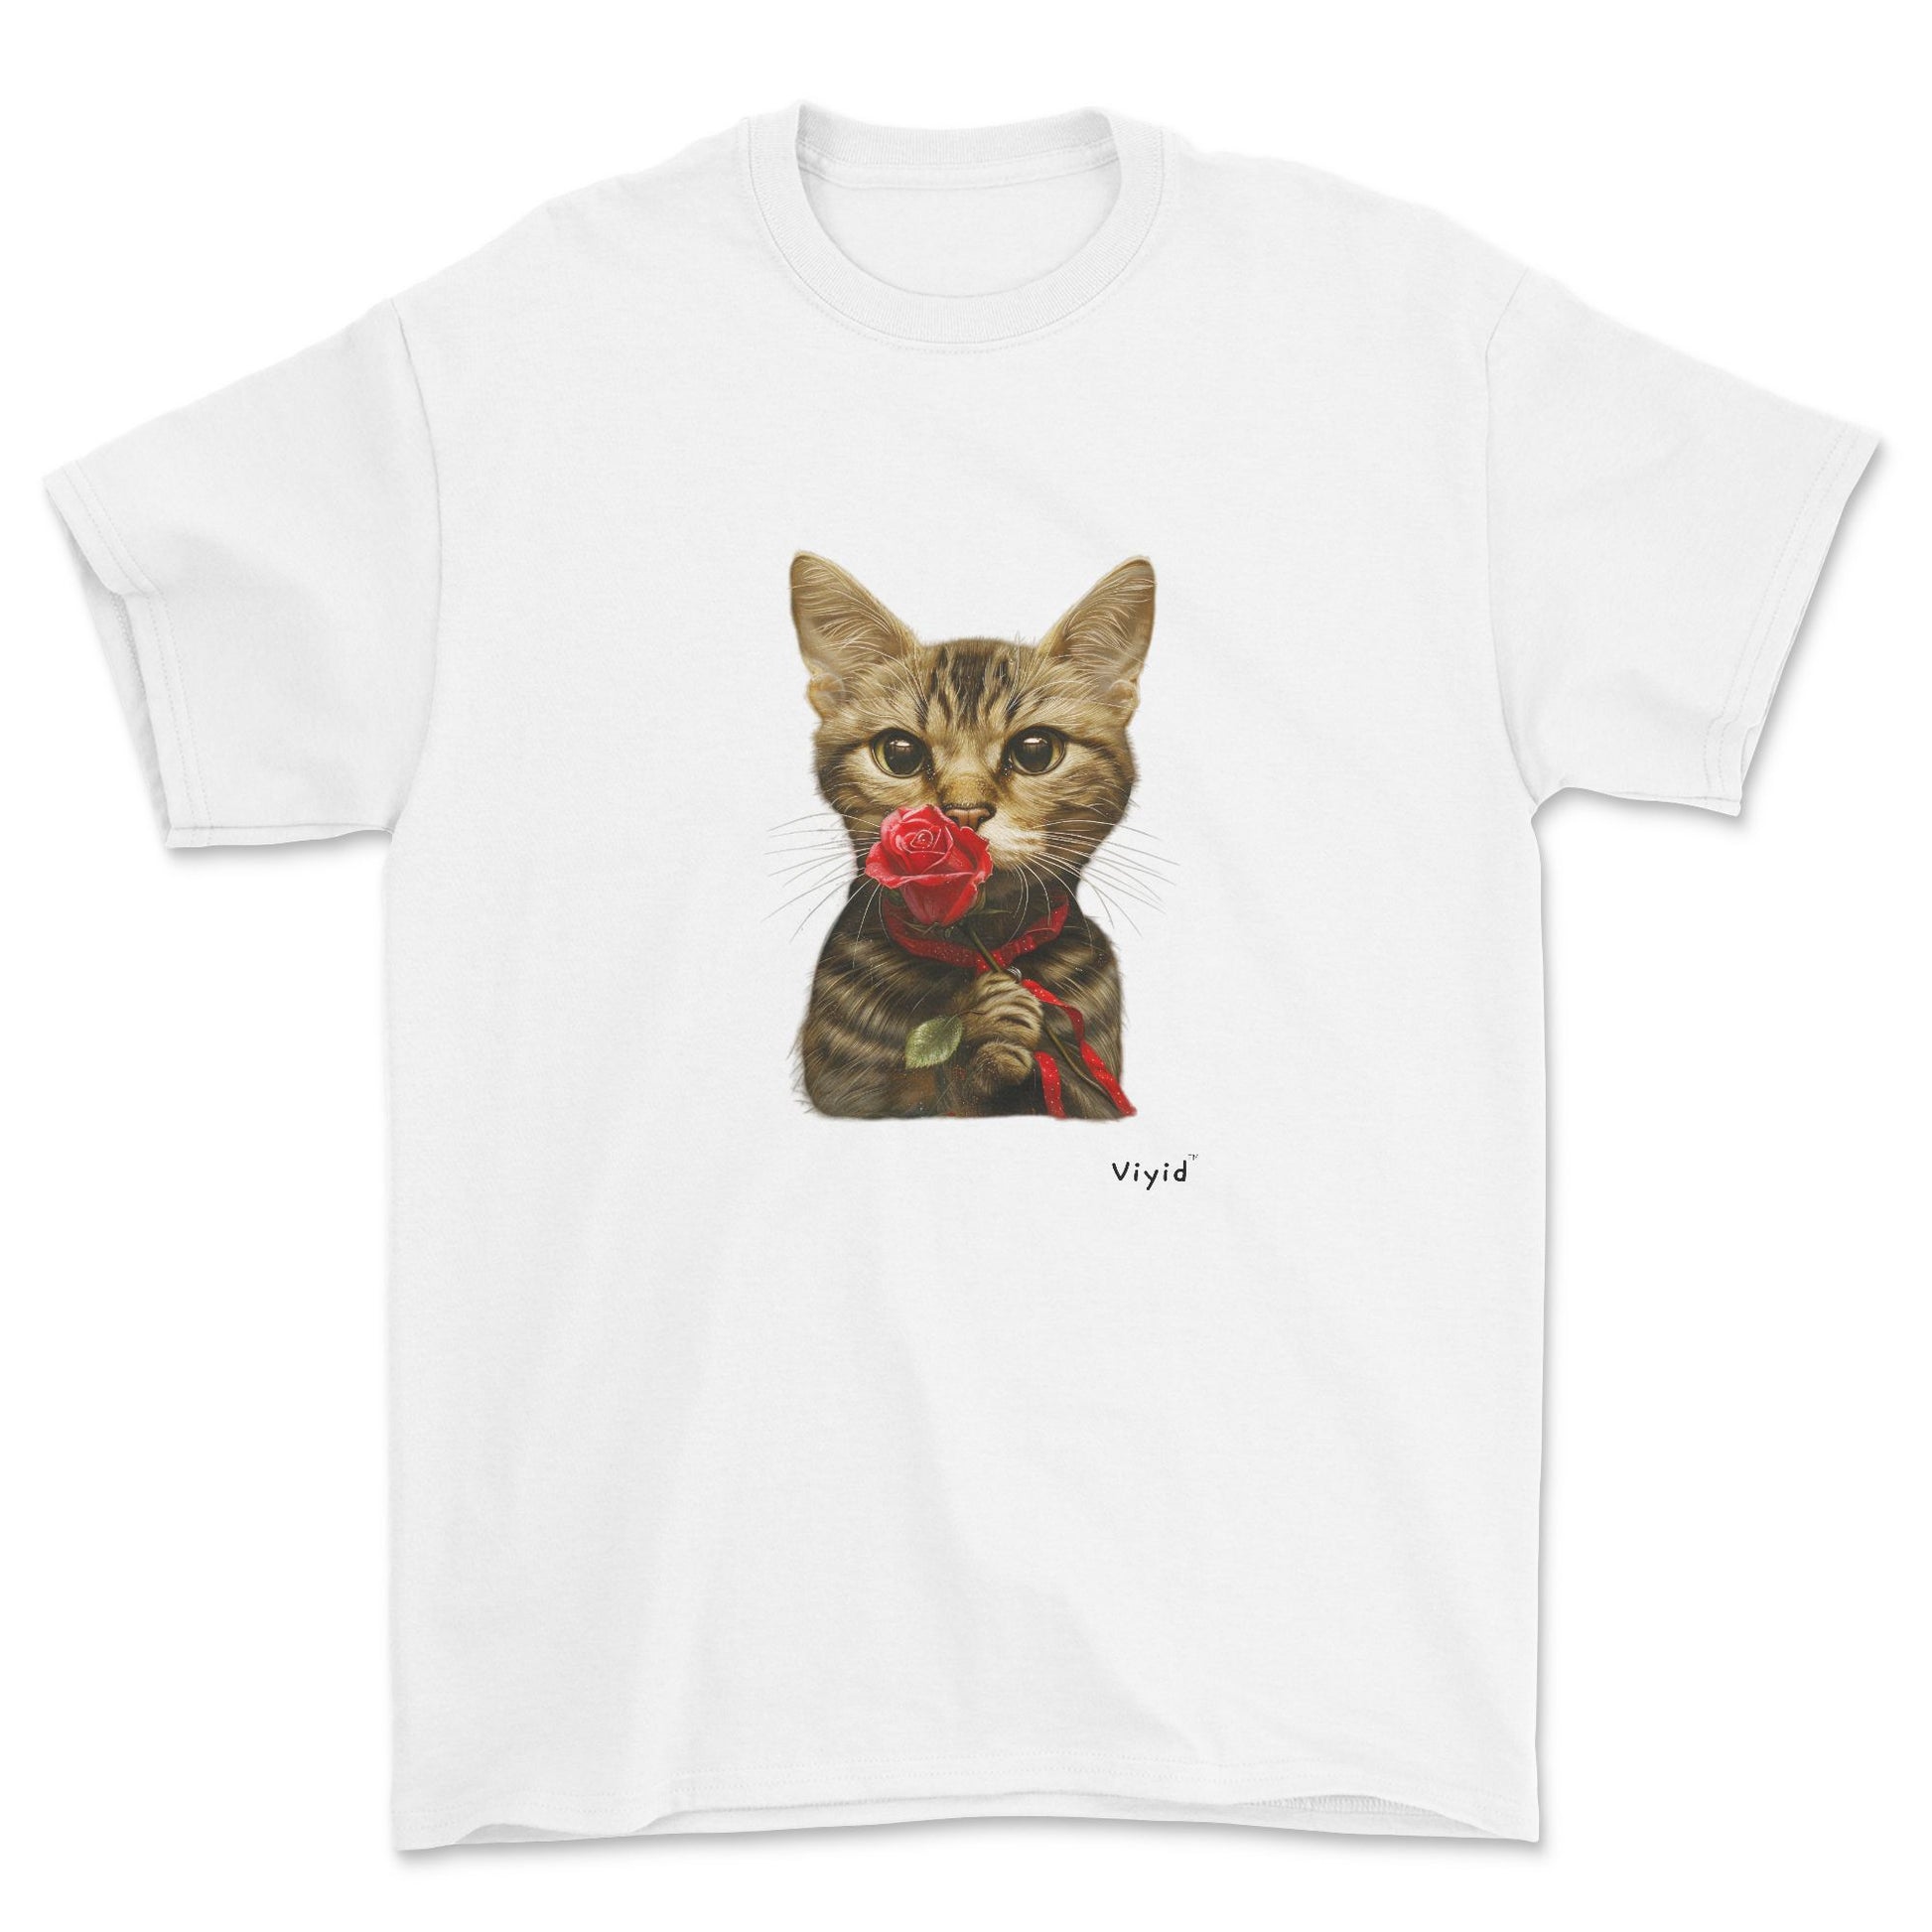 sniffing rose domestic shorthair cat youth t-shirt white